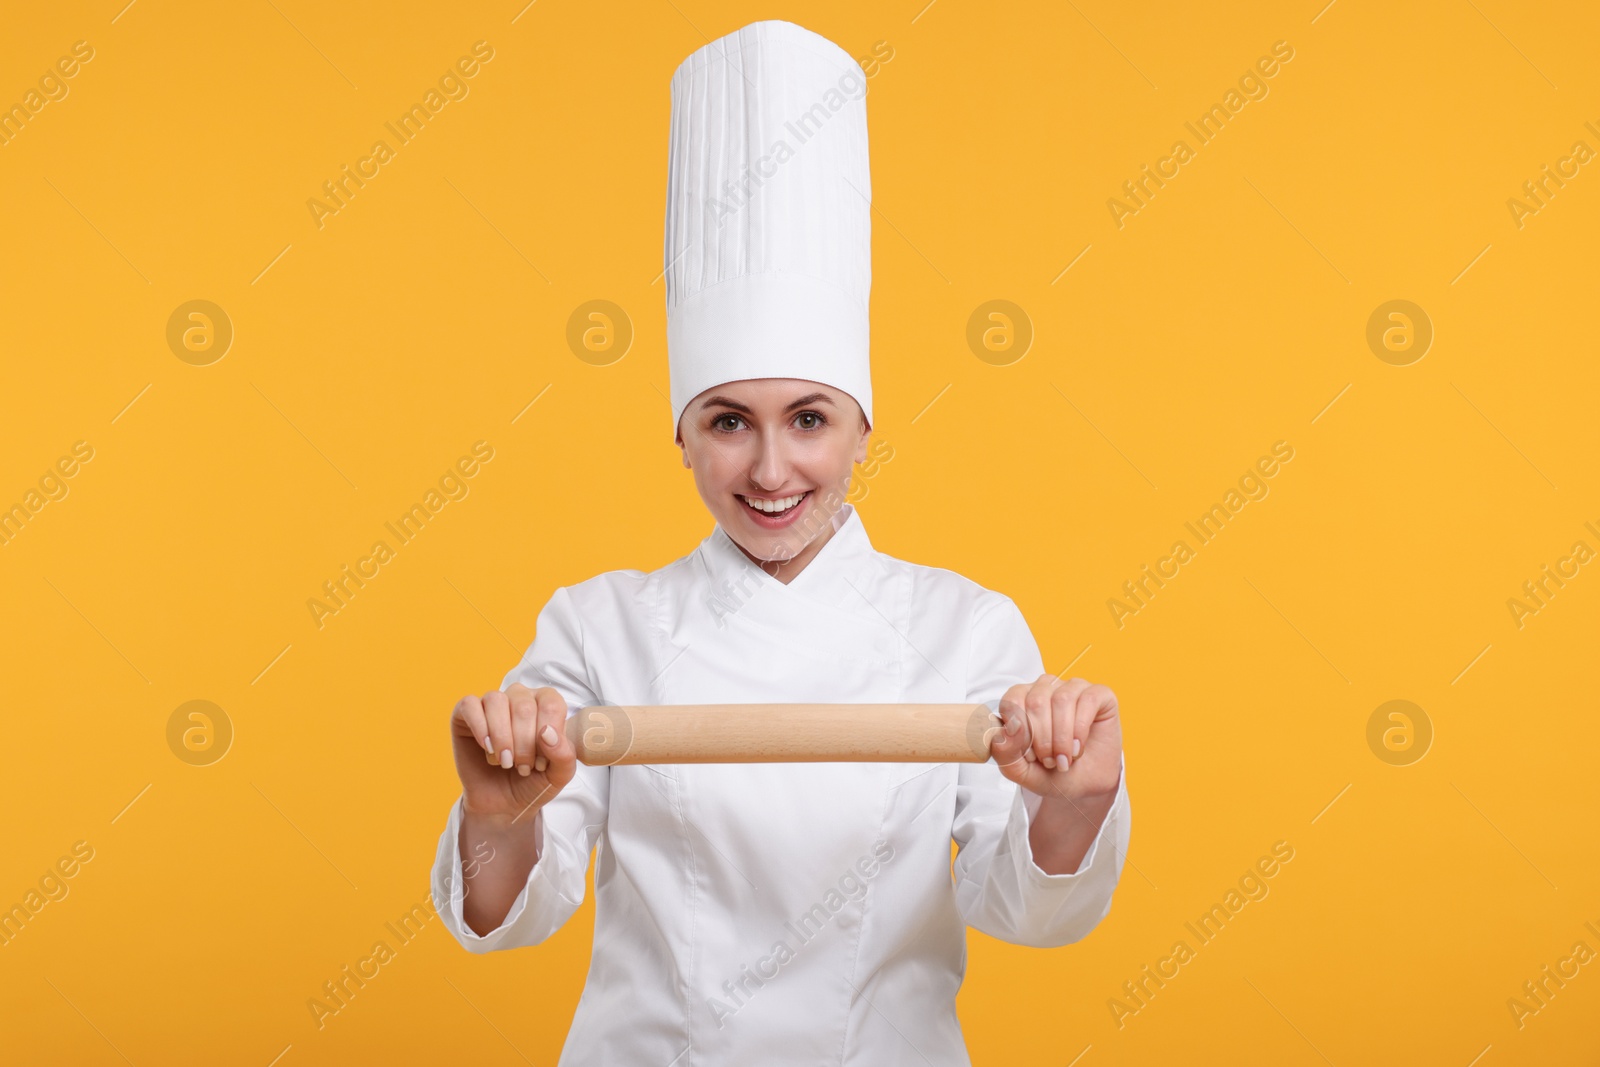 Photo of Happy professional confectioner in uniform holding rolling pin on yellow background